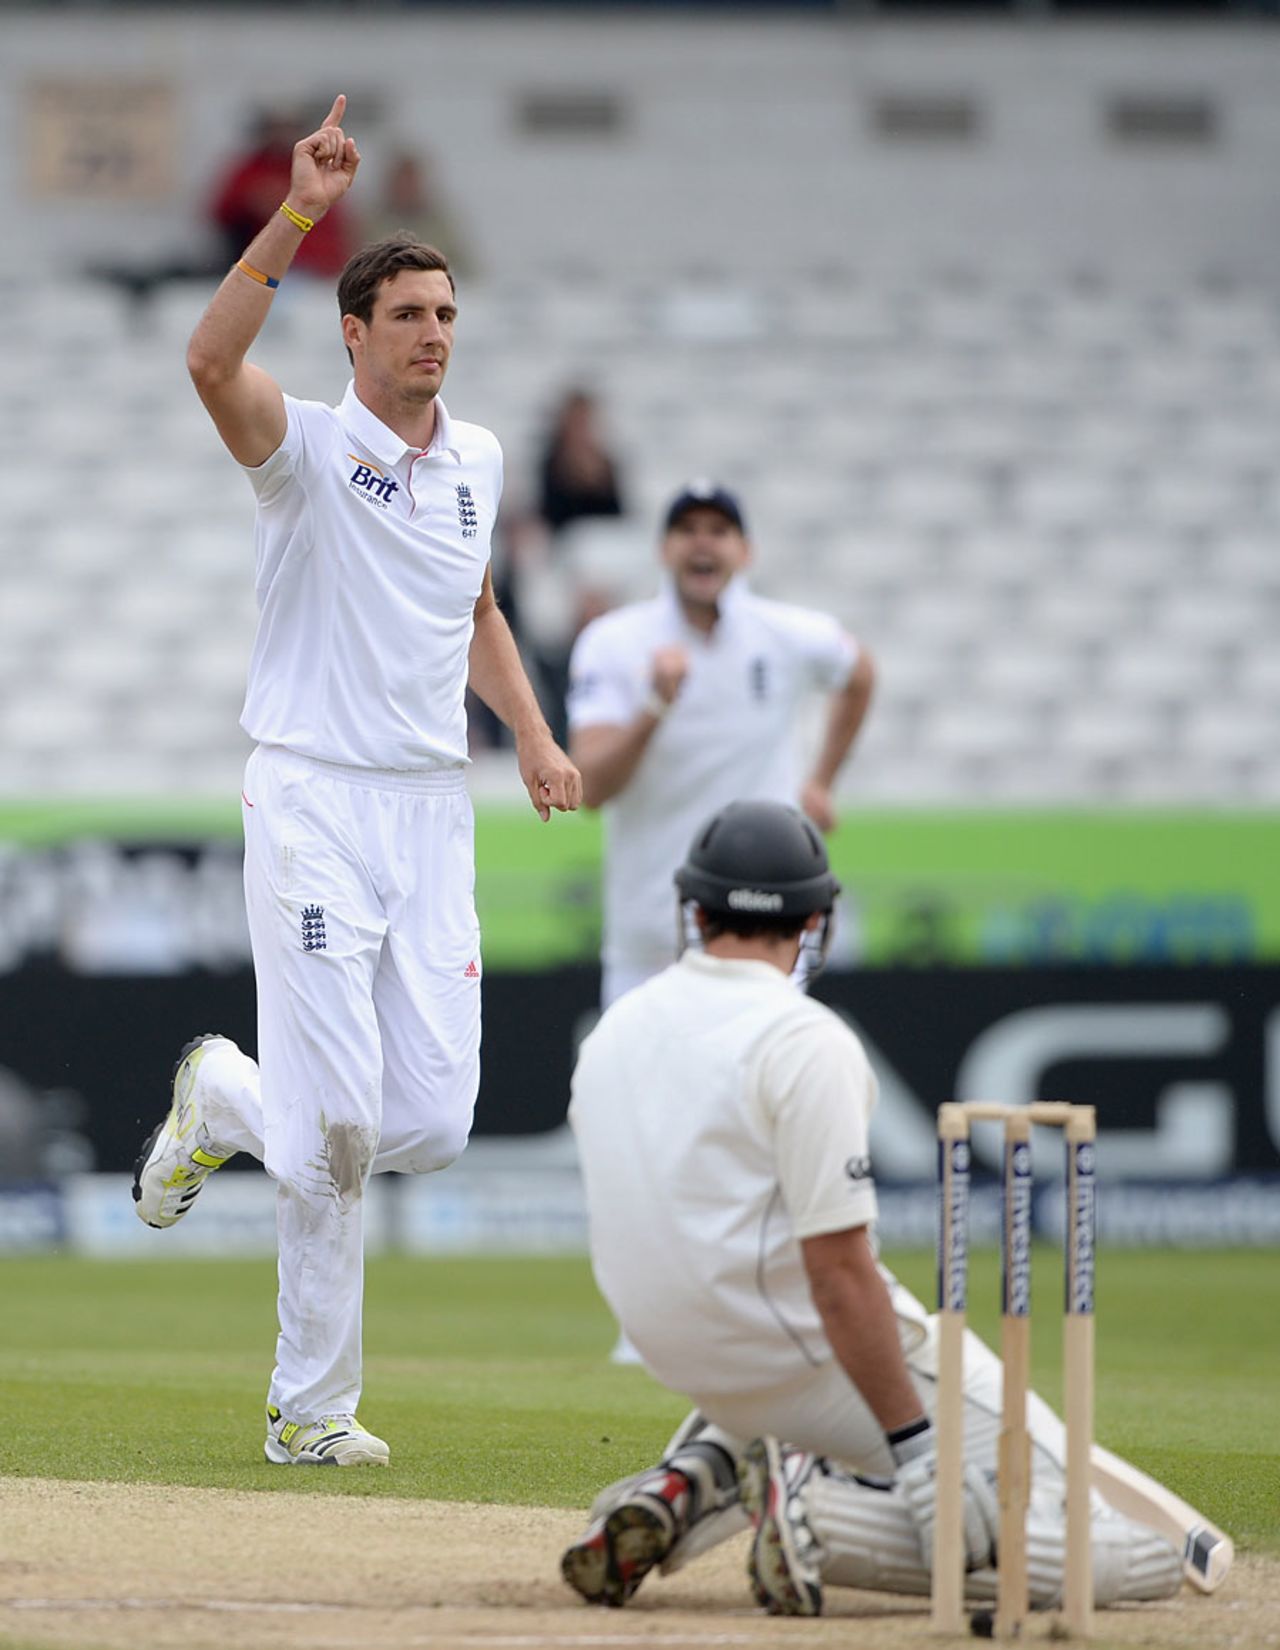 Steven Finn left Dean Brownlie on his knees, England v New Zealand, 2nd Investec Test, Headingley, 4th day, May 27, 2013